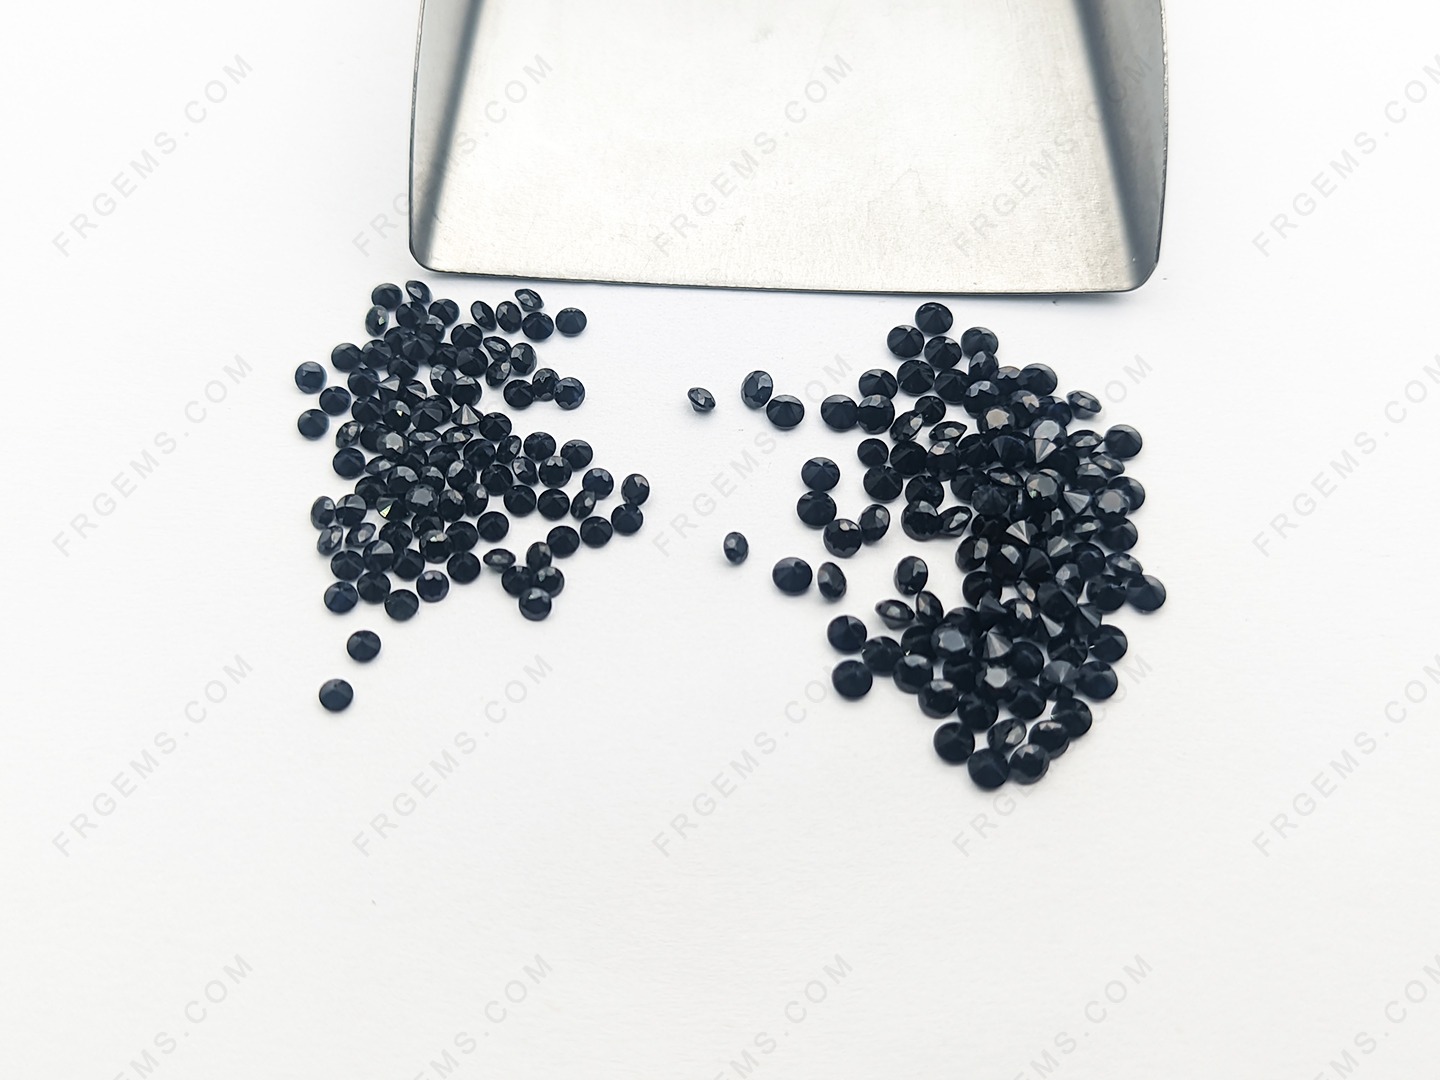 Wholesale Natural genuine Black sapphire Round faceted 2mm and 2.5mm gemstones from China